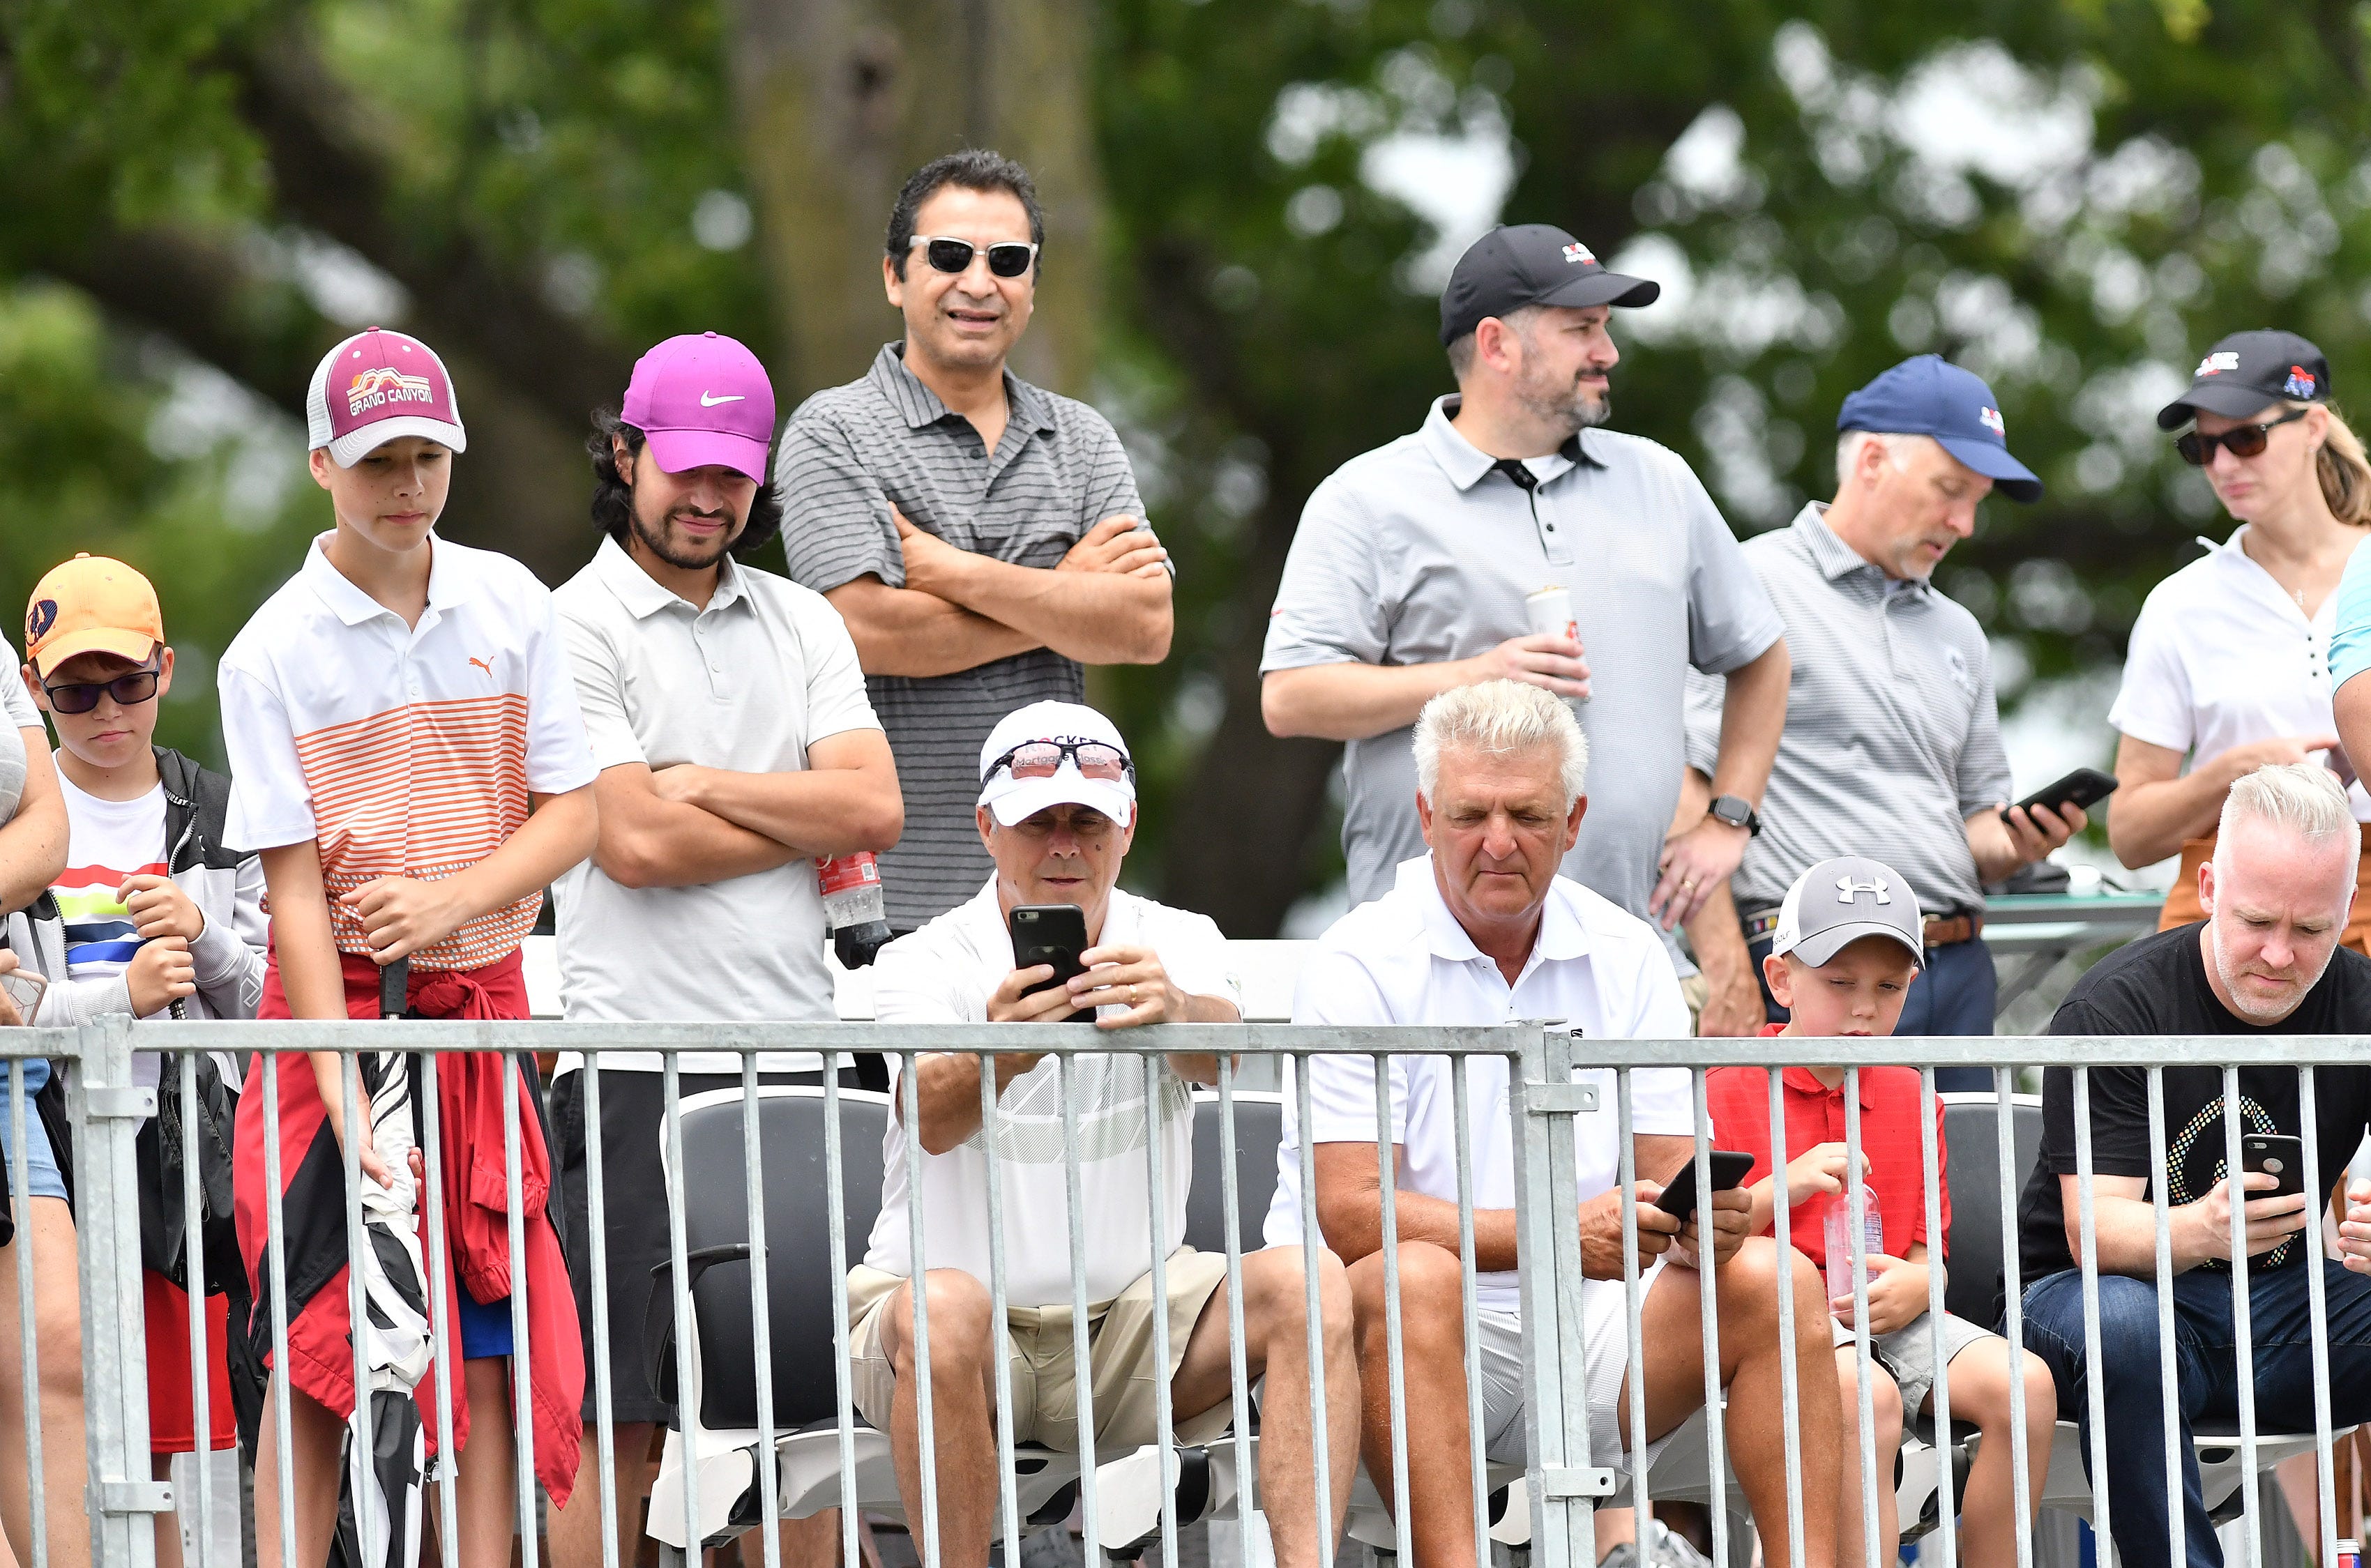 Fans watch Bryson DeChambeau about to tee off on hole No. 16.